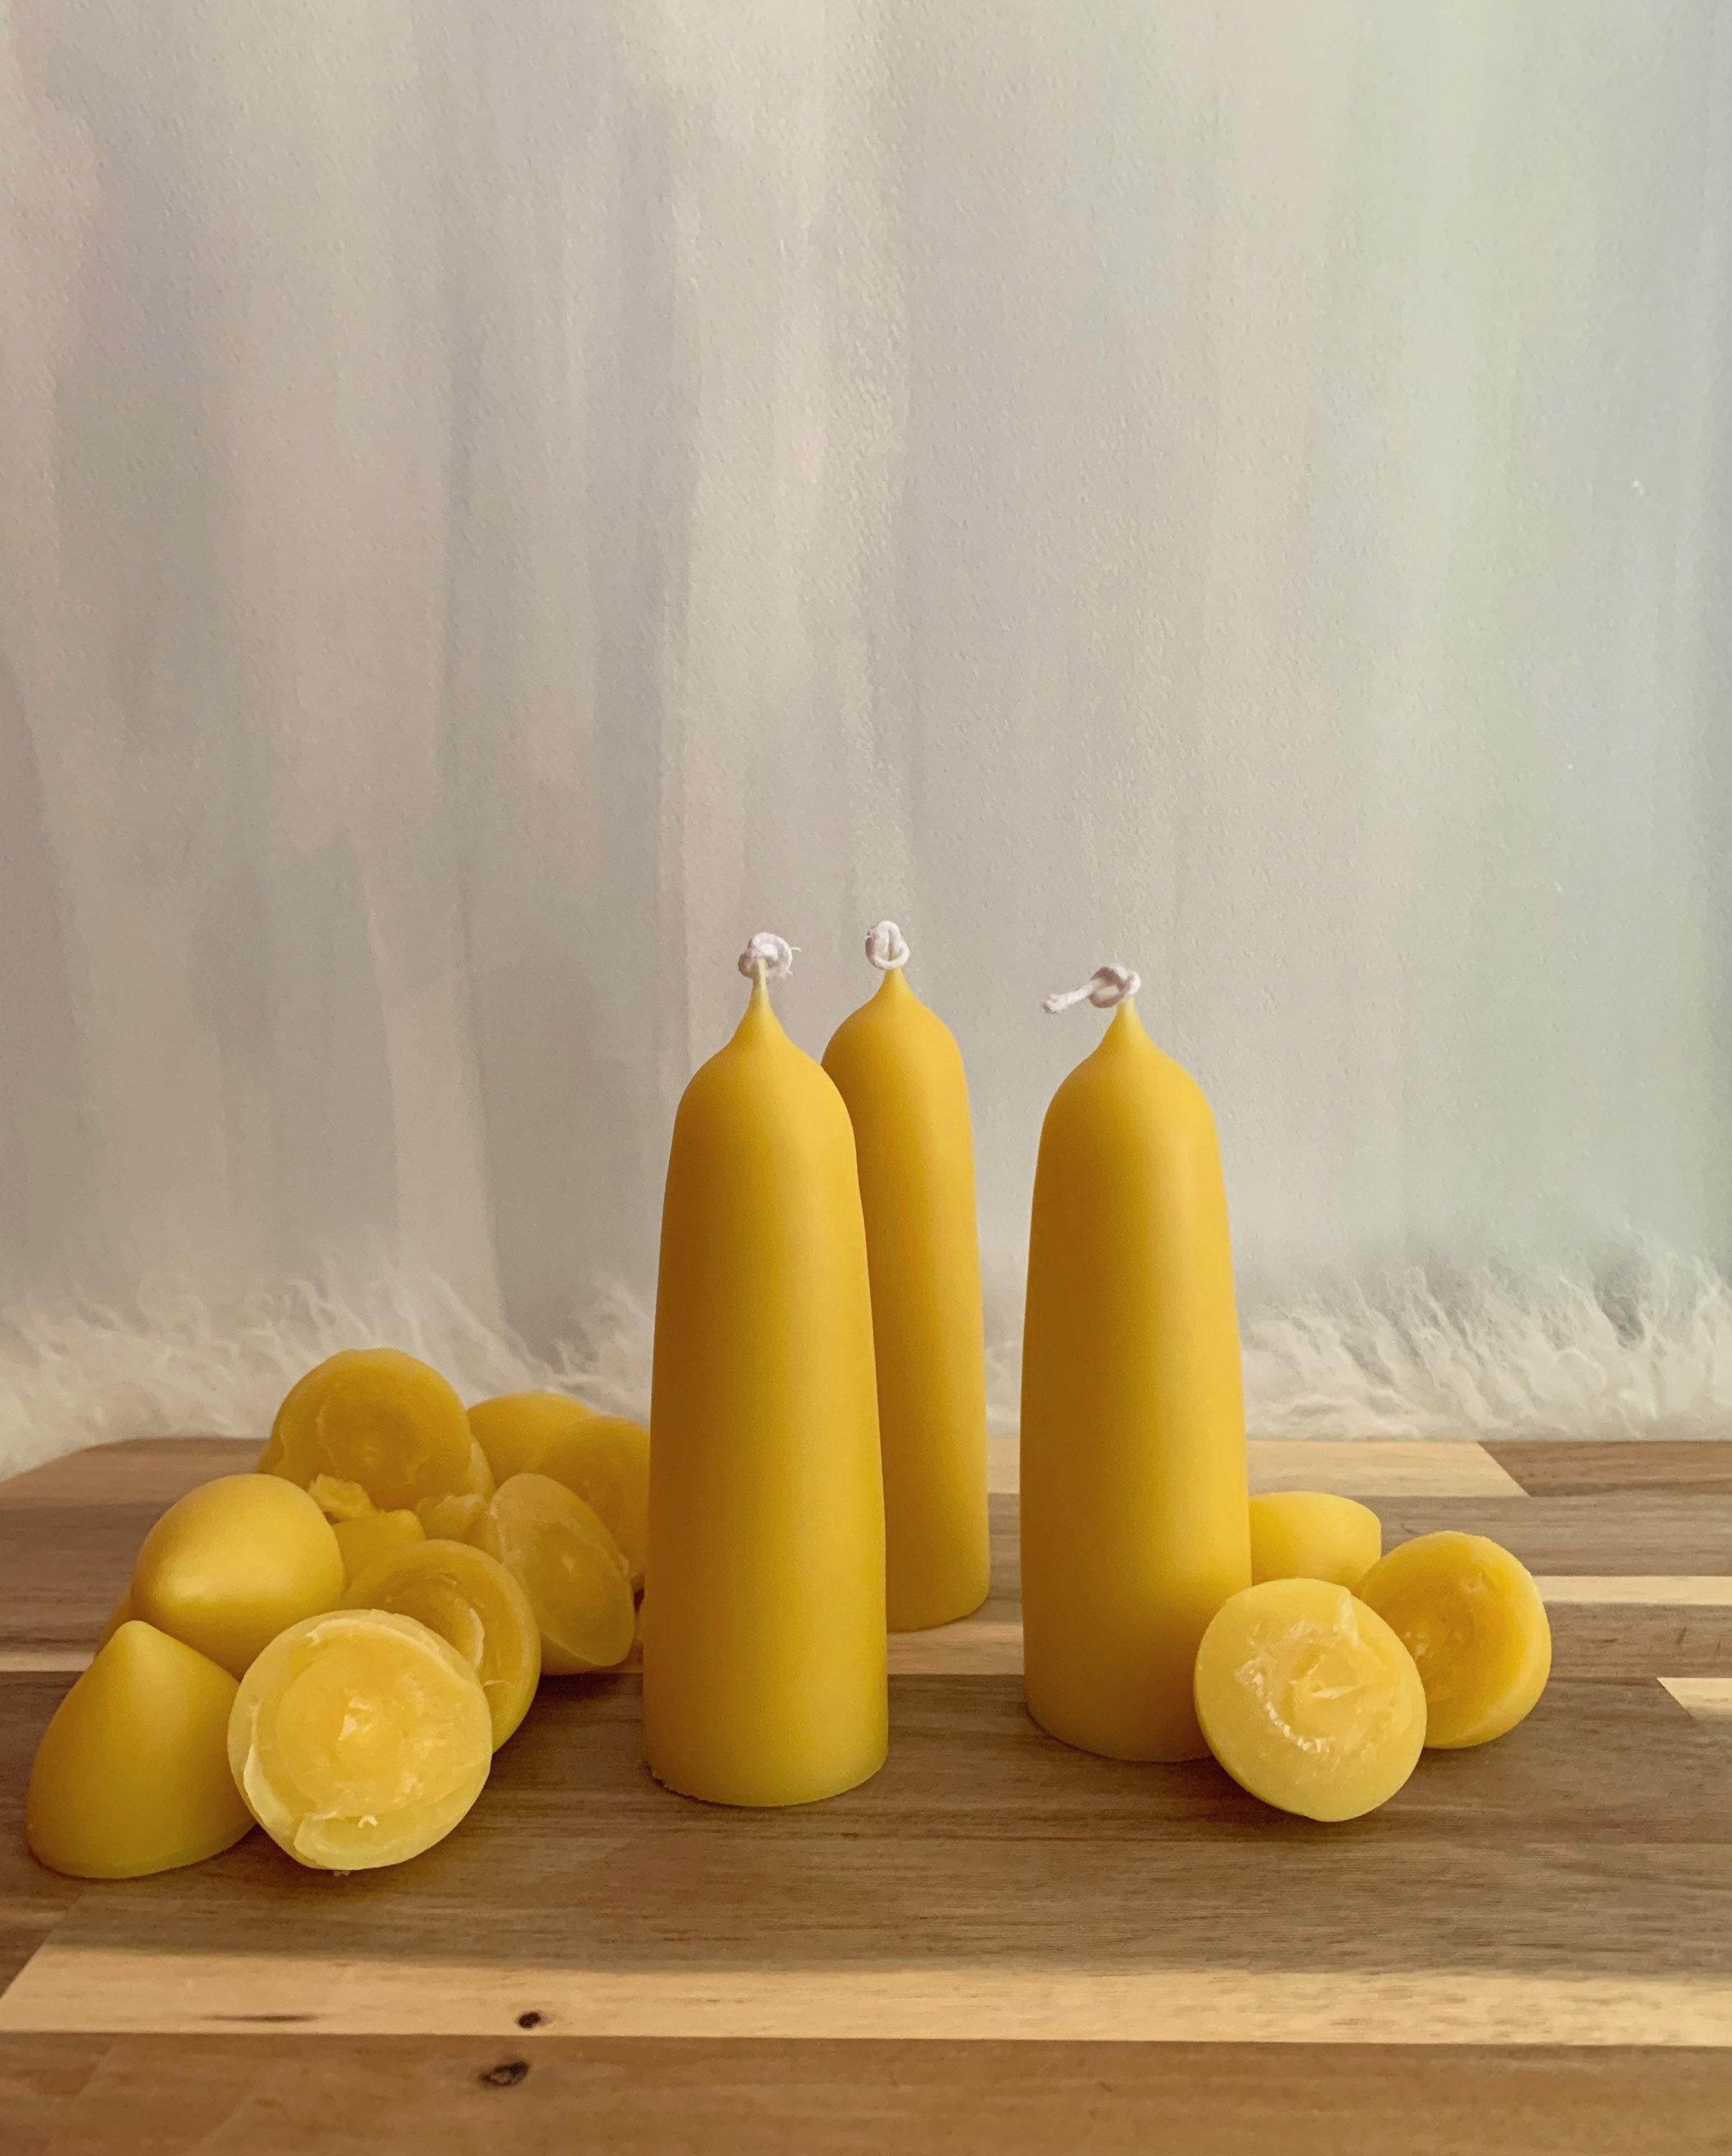 Hand Dipped Beeswax Stubby Candles Yellow Set of 2 candles.